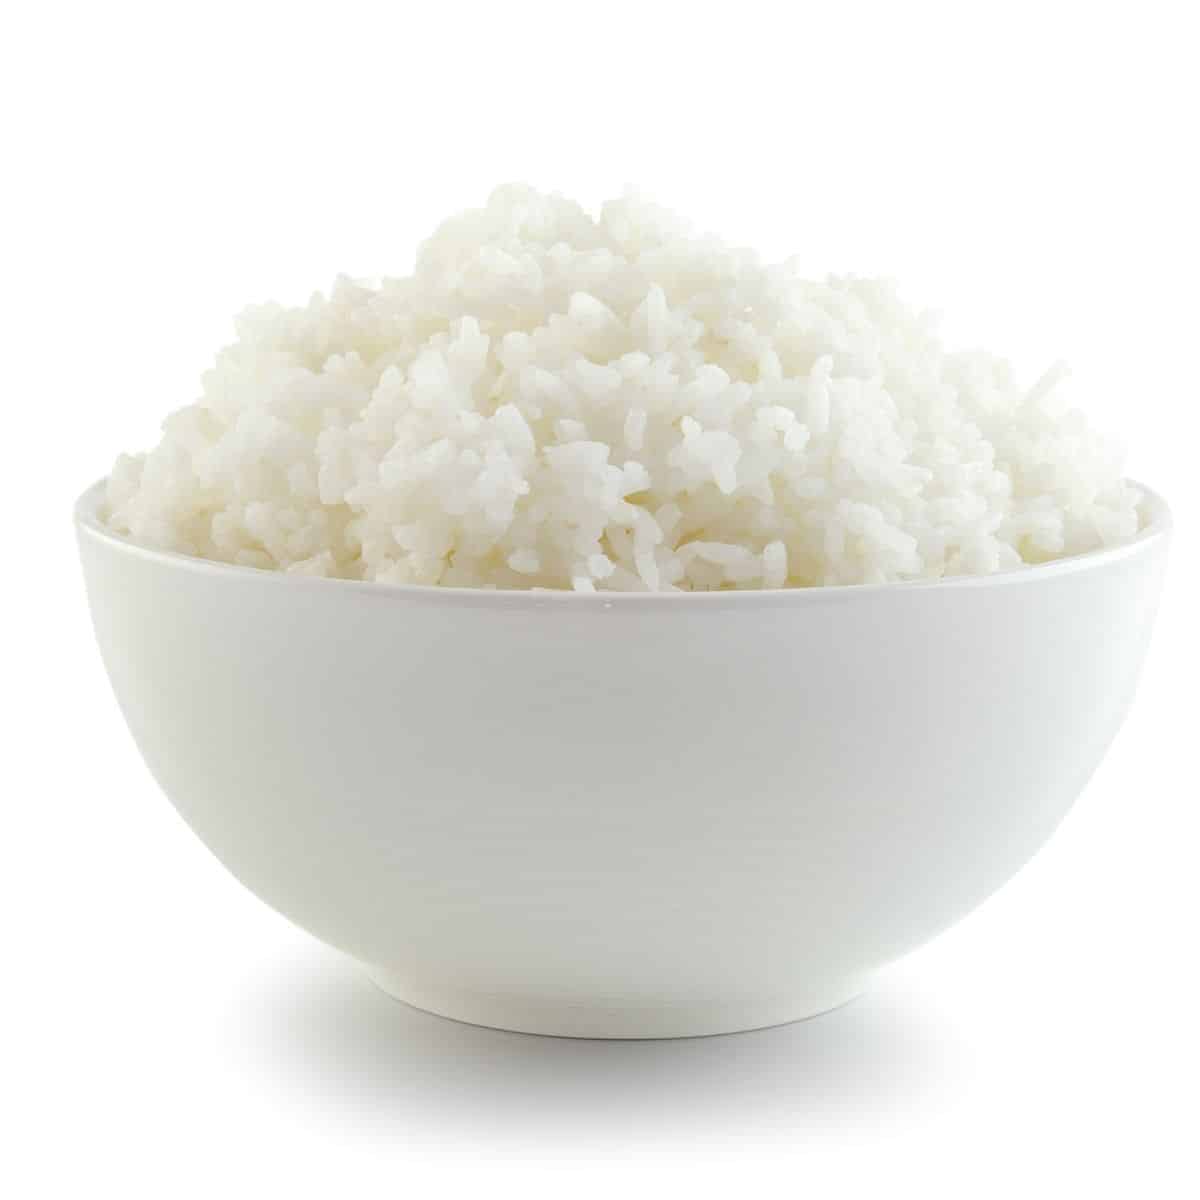 White rice in a bowl on a white background.